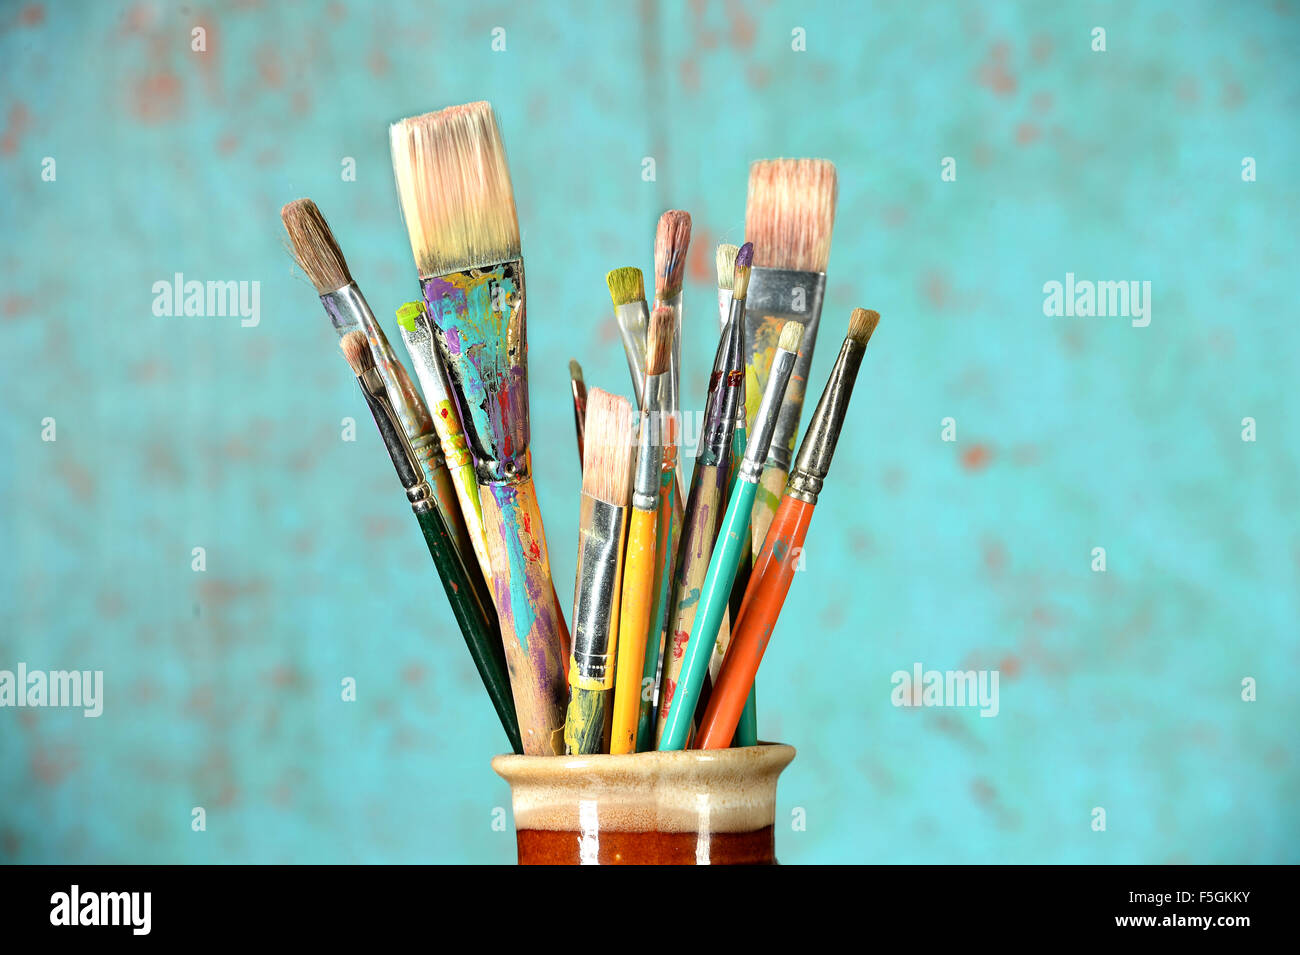 Artist paintbrushes in a jar over colorful background Stock Photo